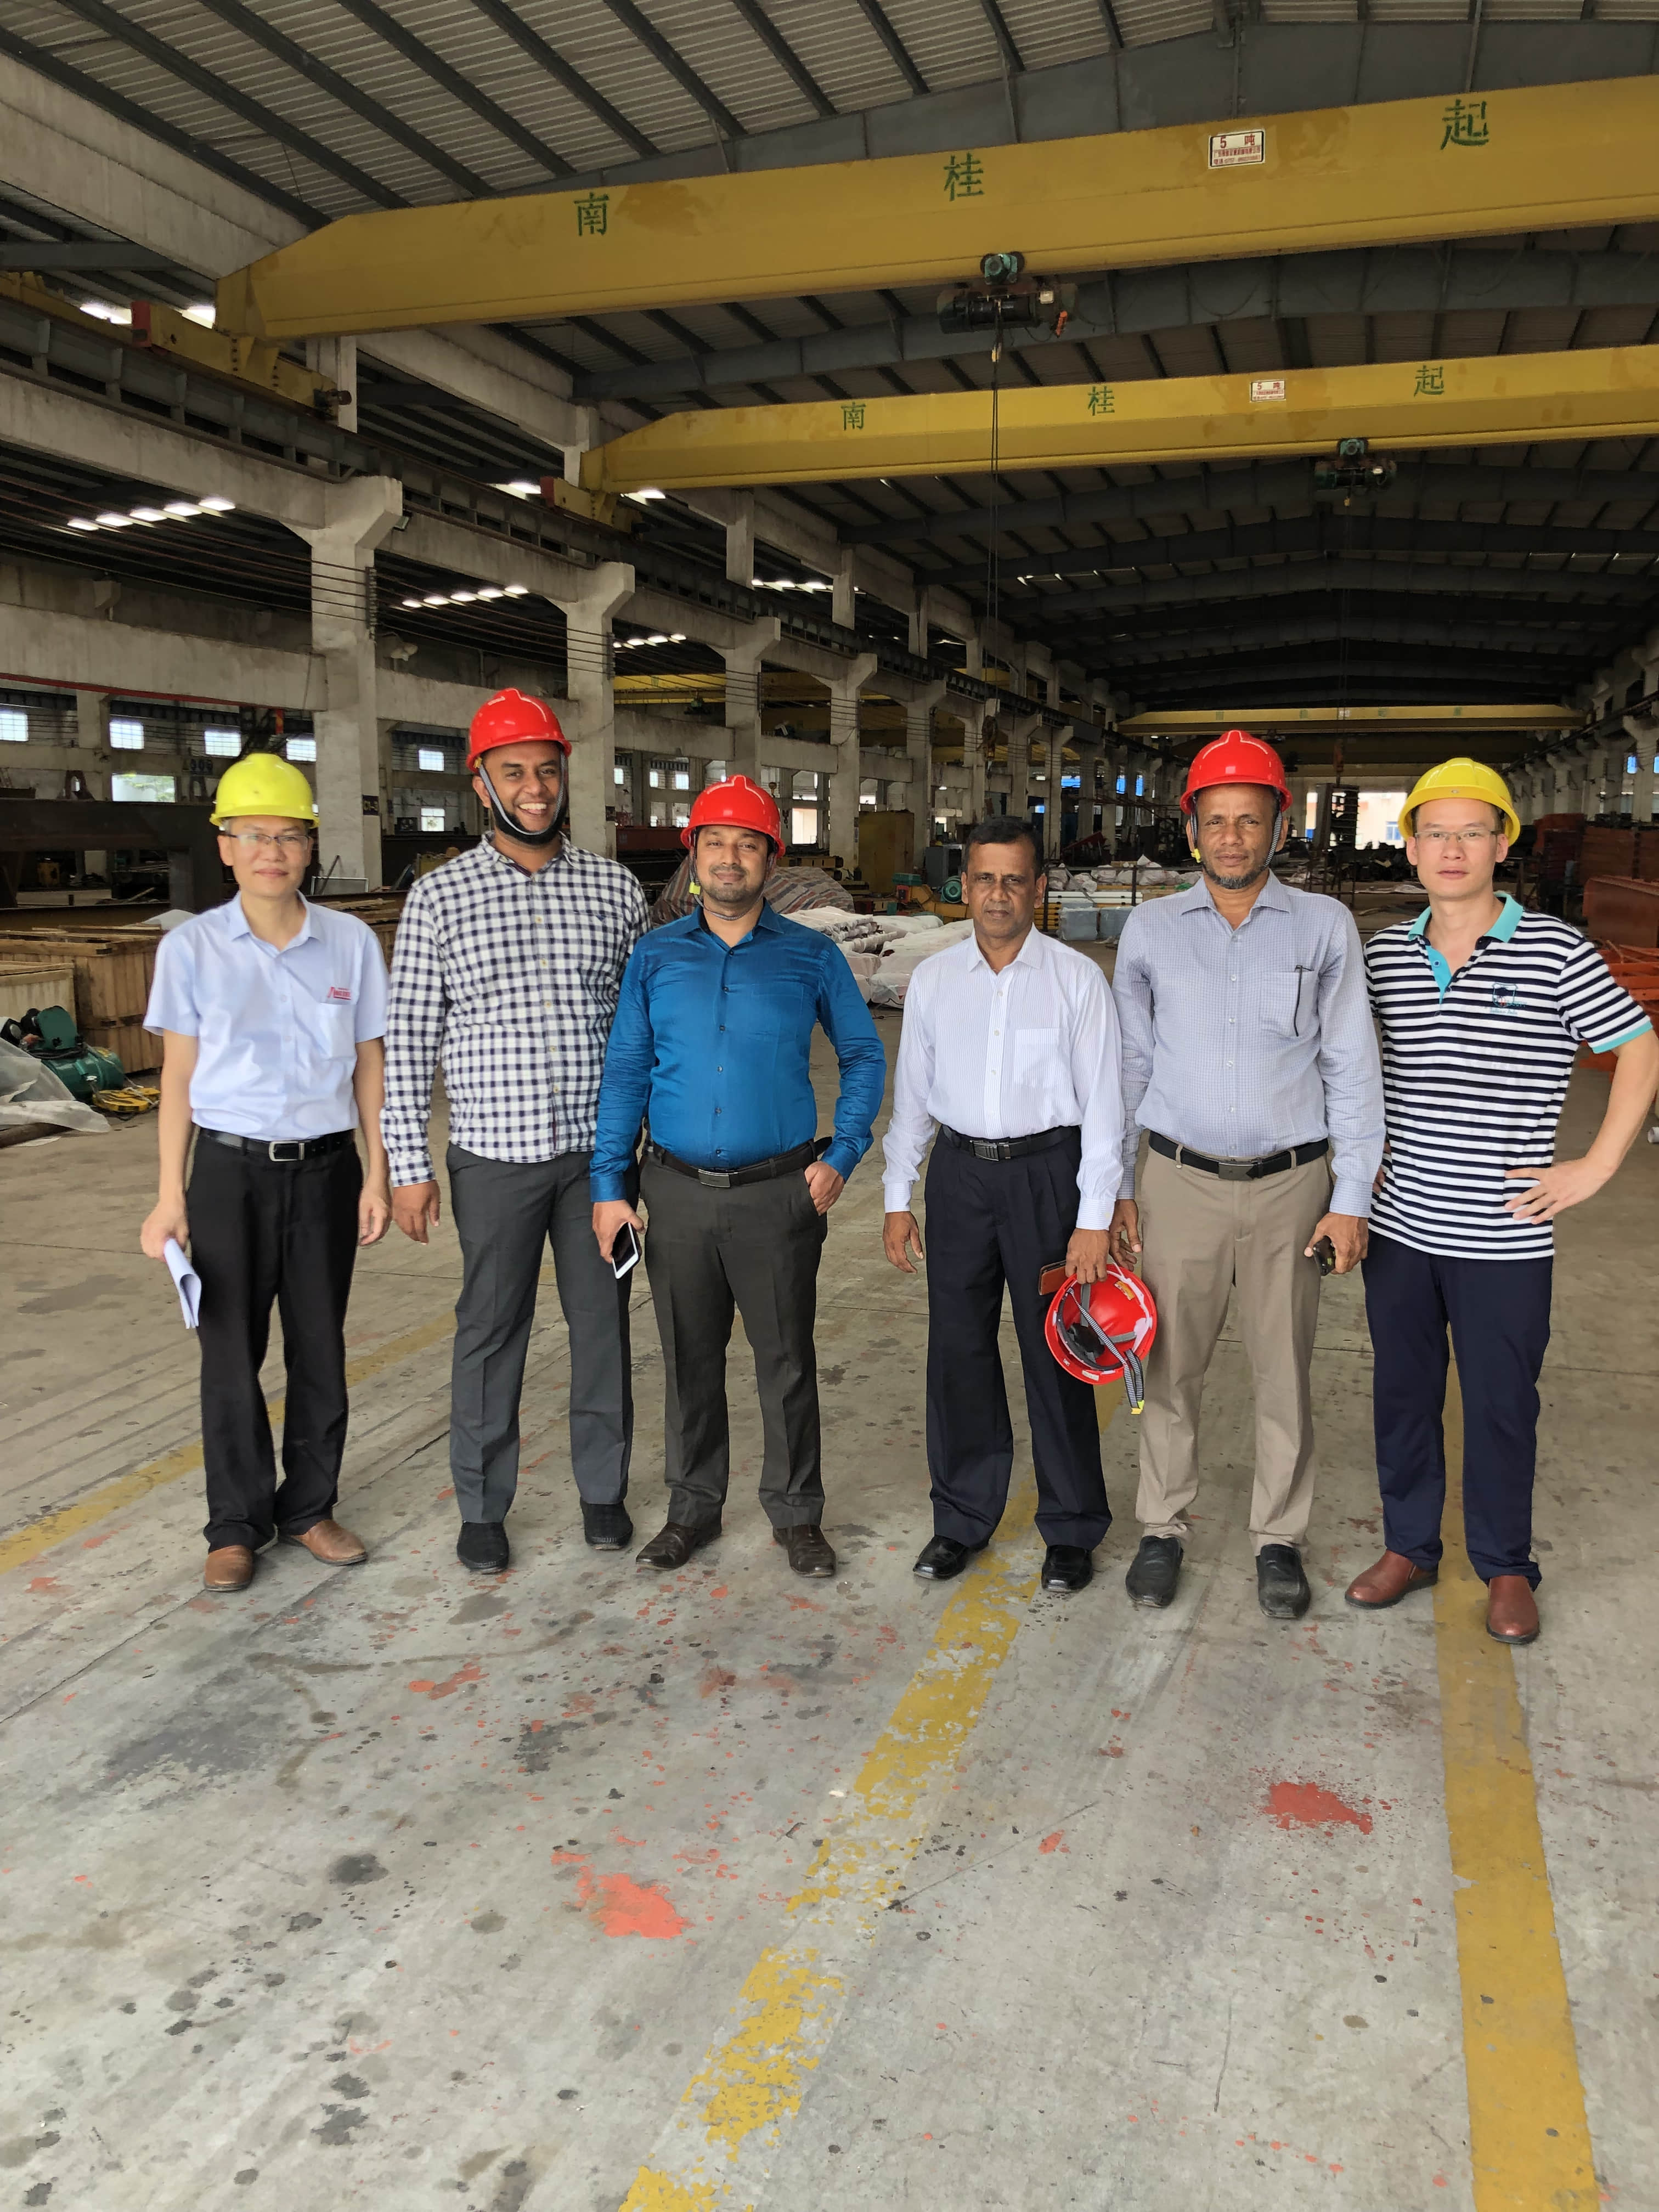 In 2019, "One Belt And One Road" - Sri Lankan customers came to the company to inspect the goods